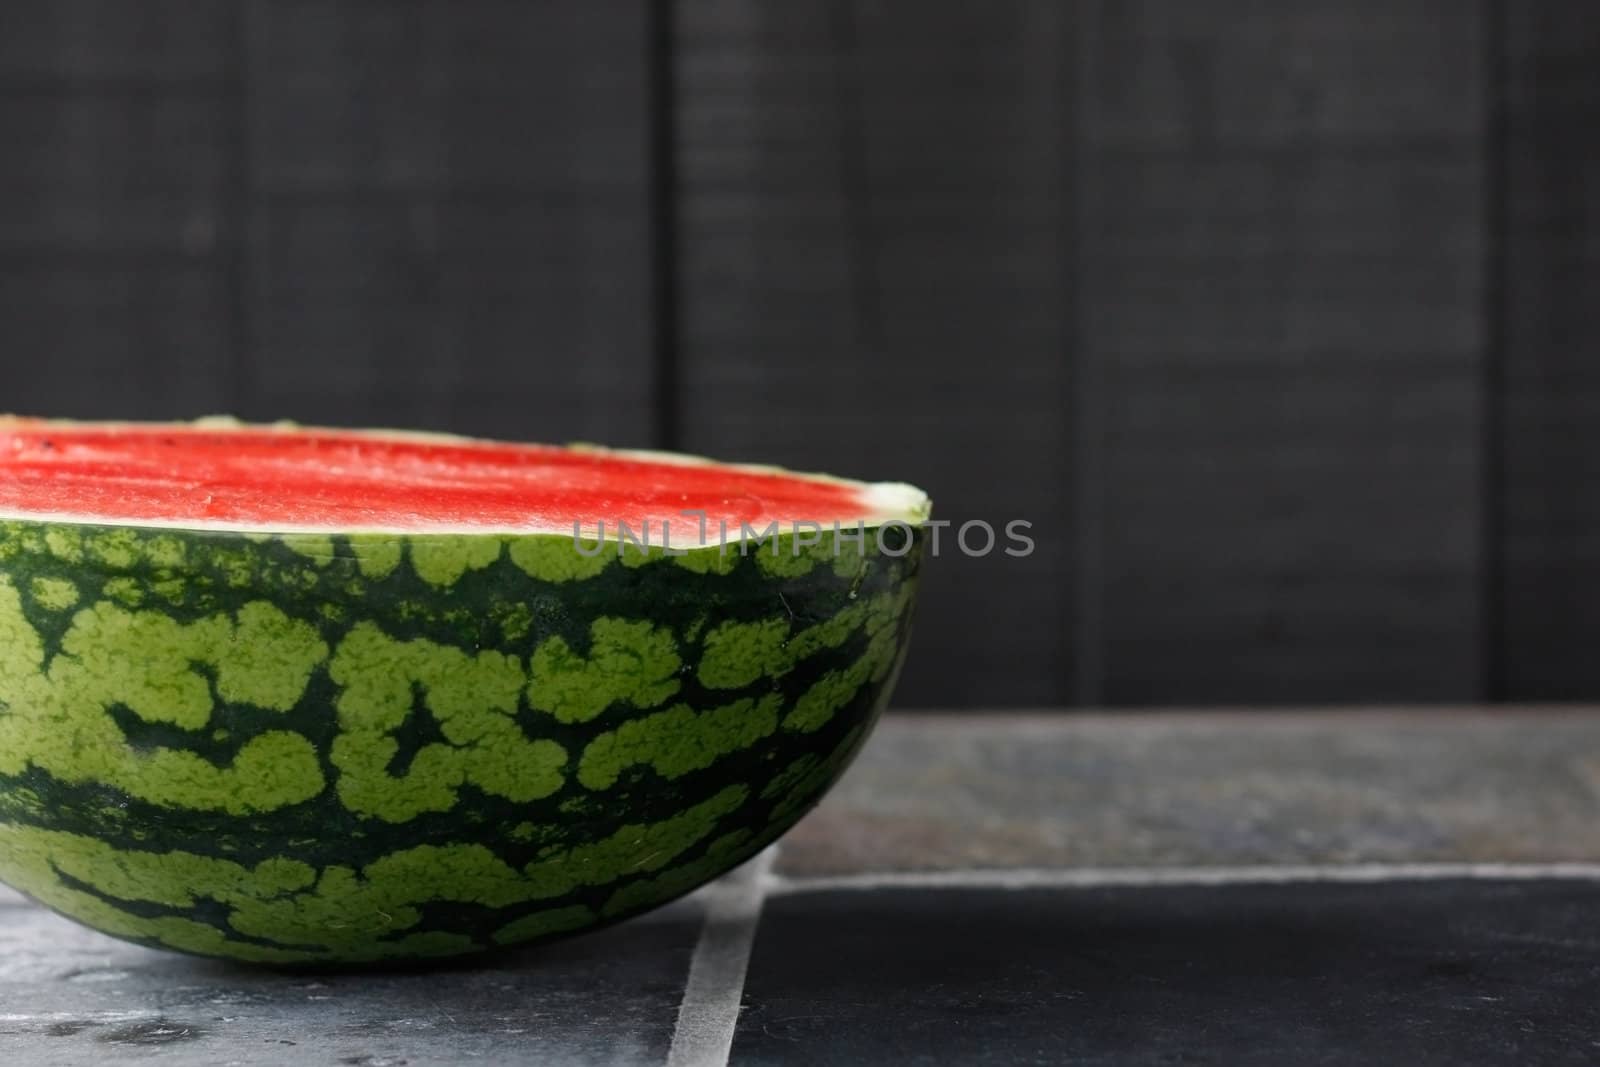 Delicious red water melon